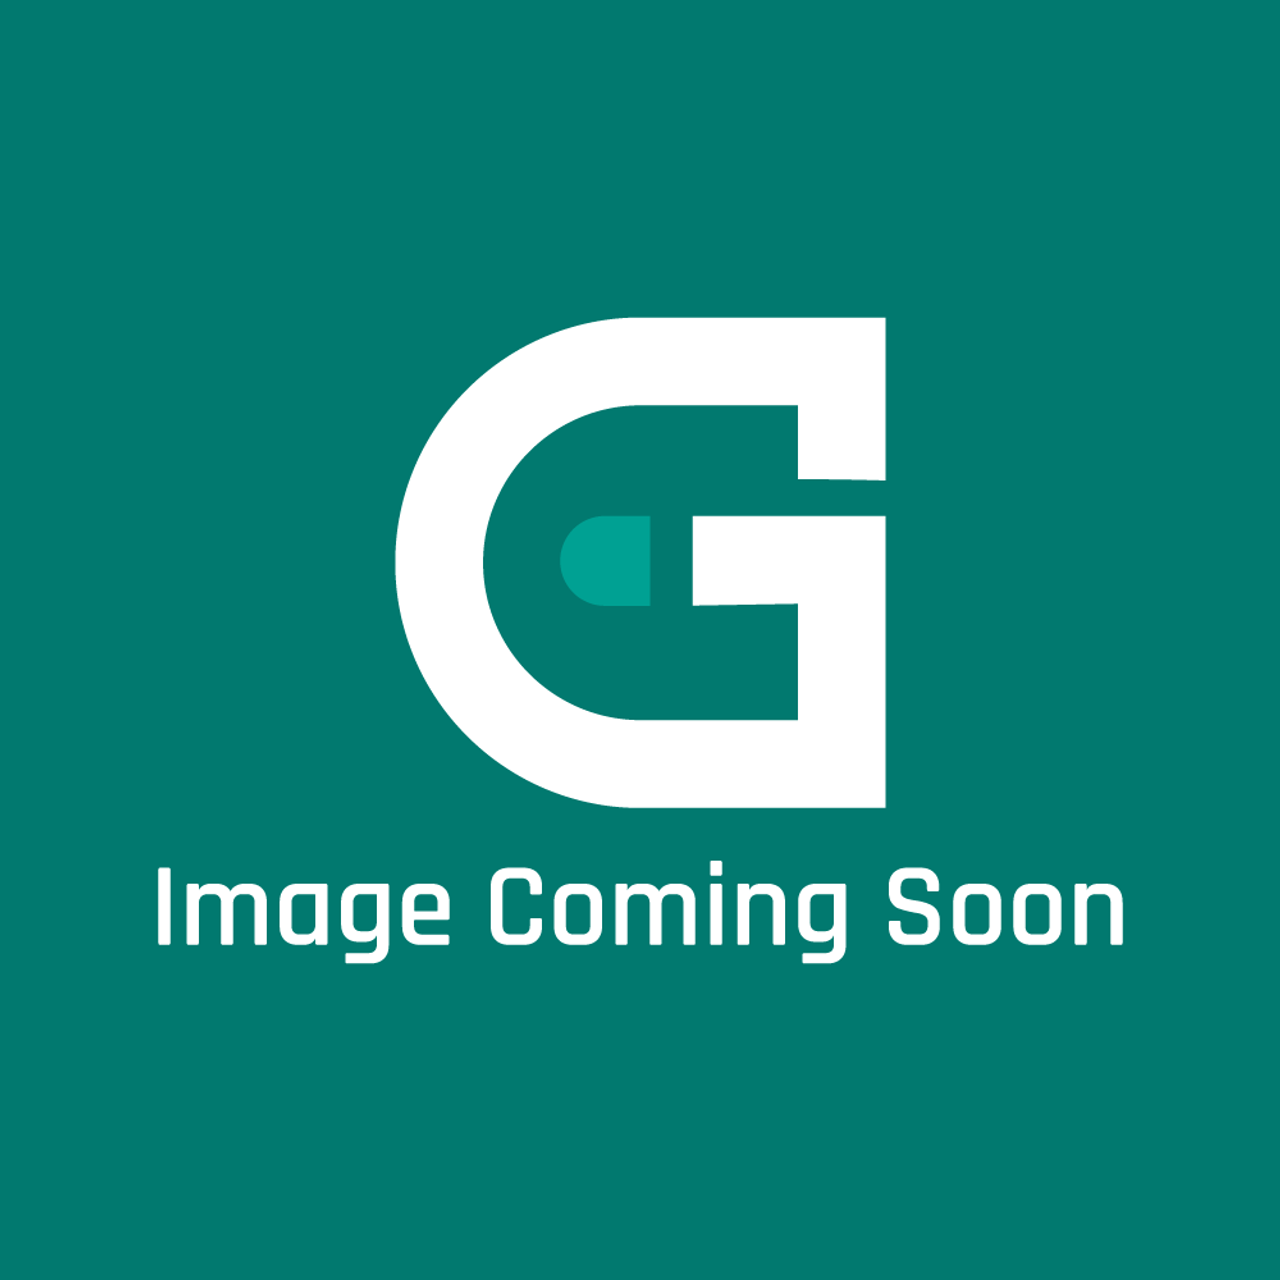 LG 3878W5A0012 - Book,Cook - Image Coming Soon!